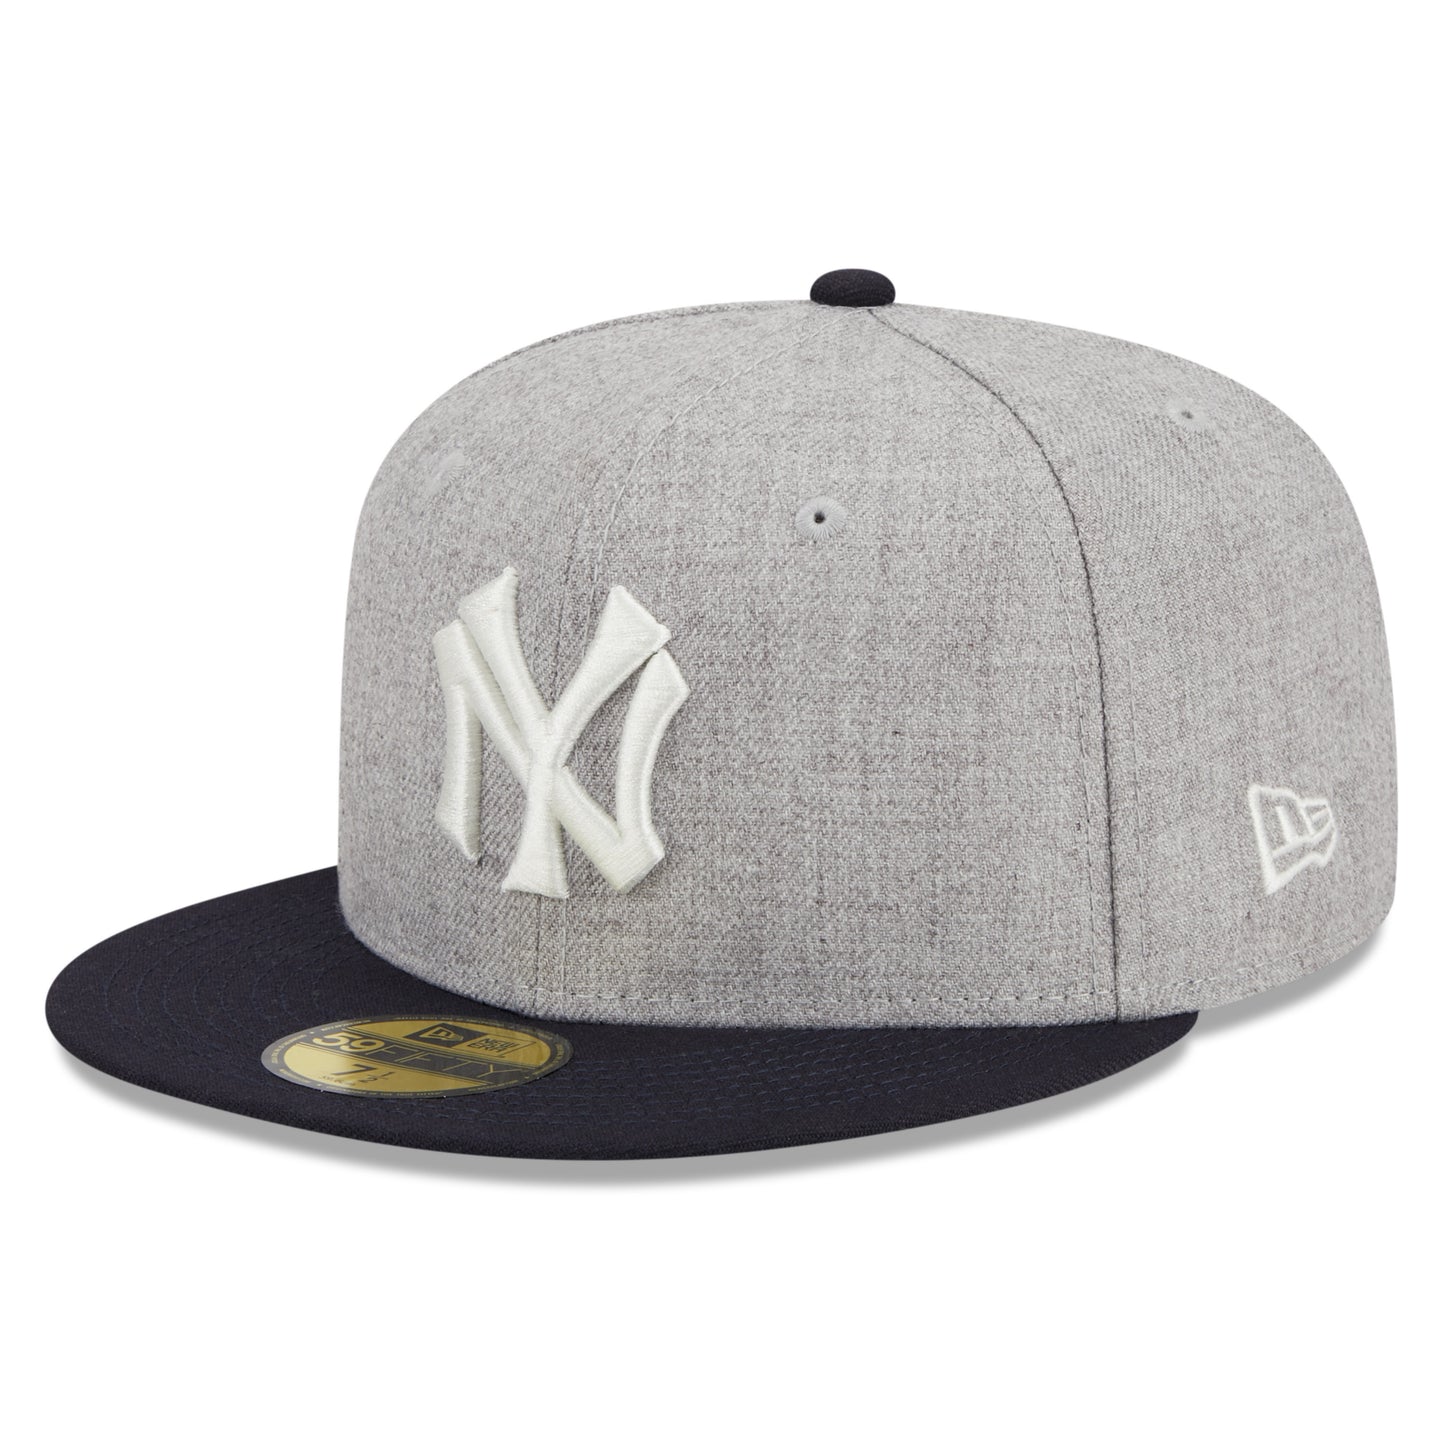 NEW ERA 59FIFTY MLB NEW YORK YANKEES WORLD SERIES 1923 TWO TONE / GREY UV FITTED CAP